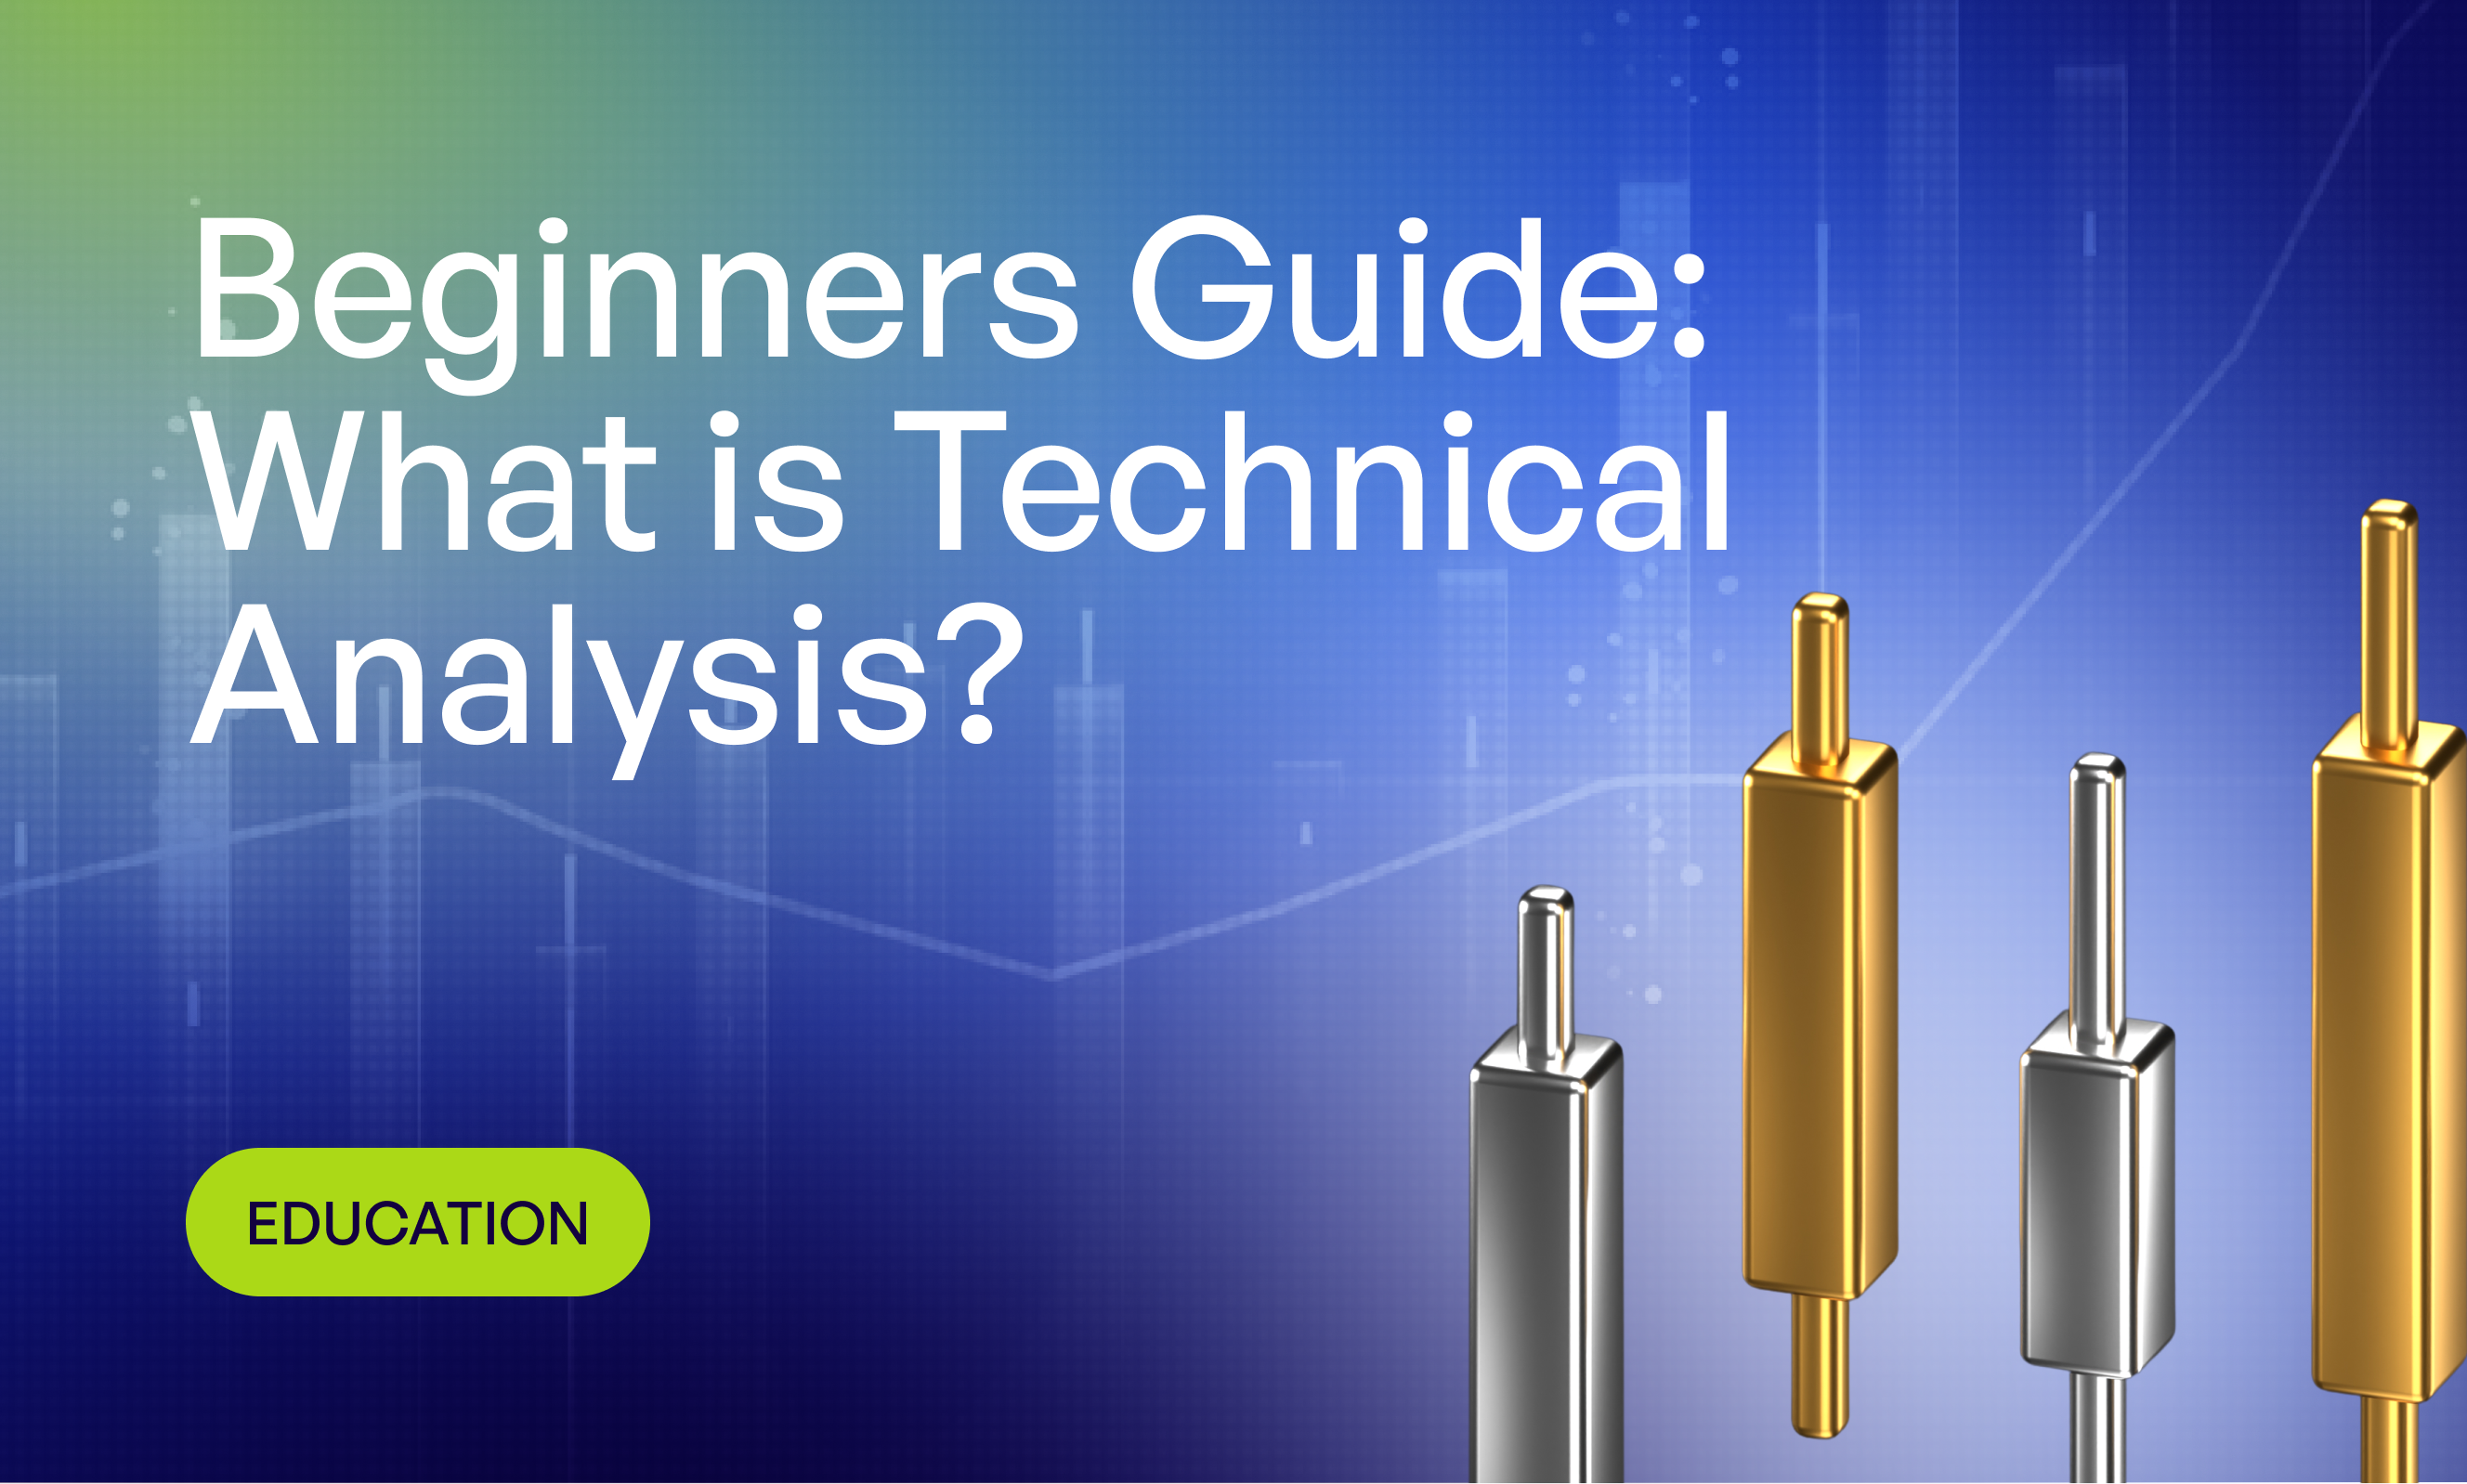 Beginners Guide: What is Technical Analysis?